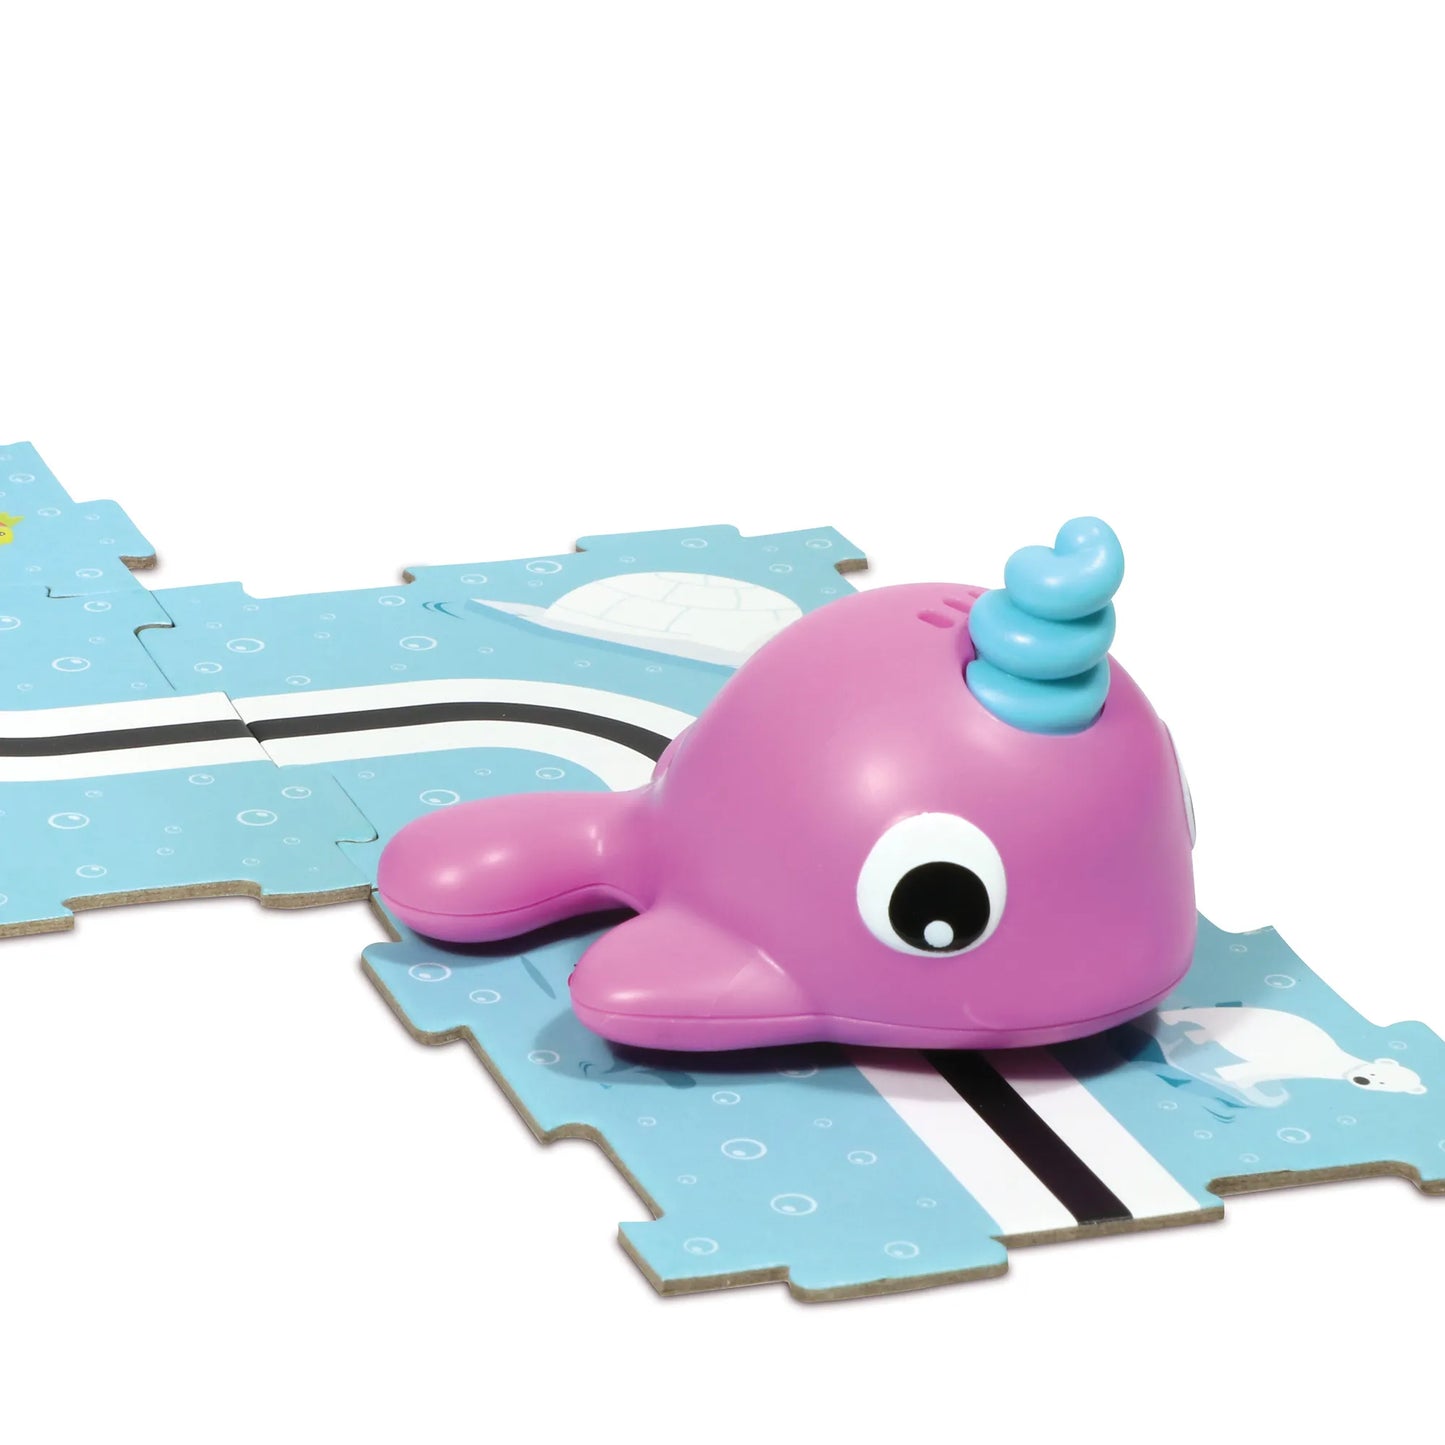 Learning Resources Coding Critters Go-Pets Dipper the Narwhal